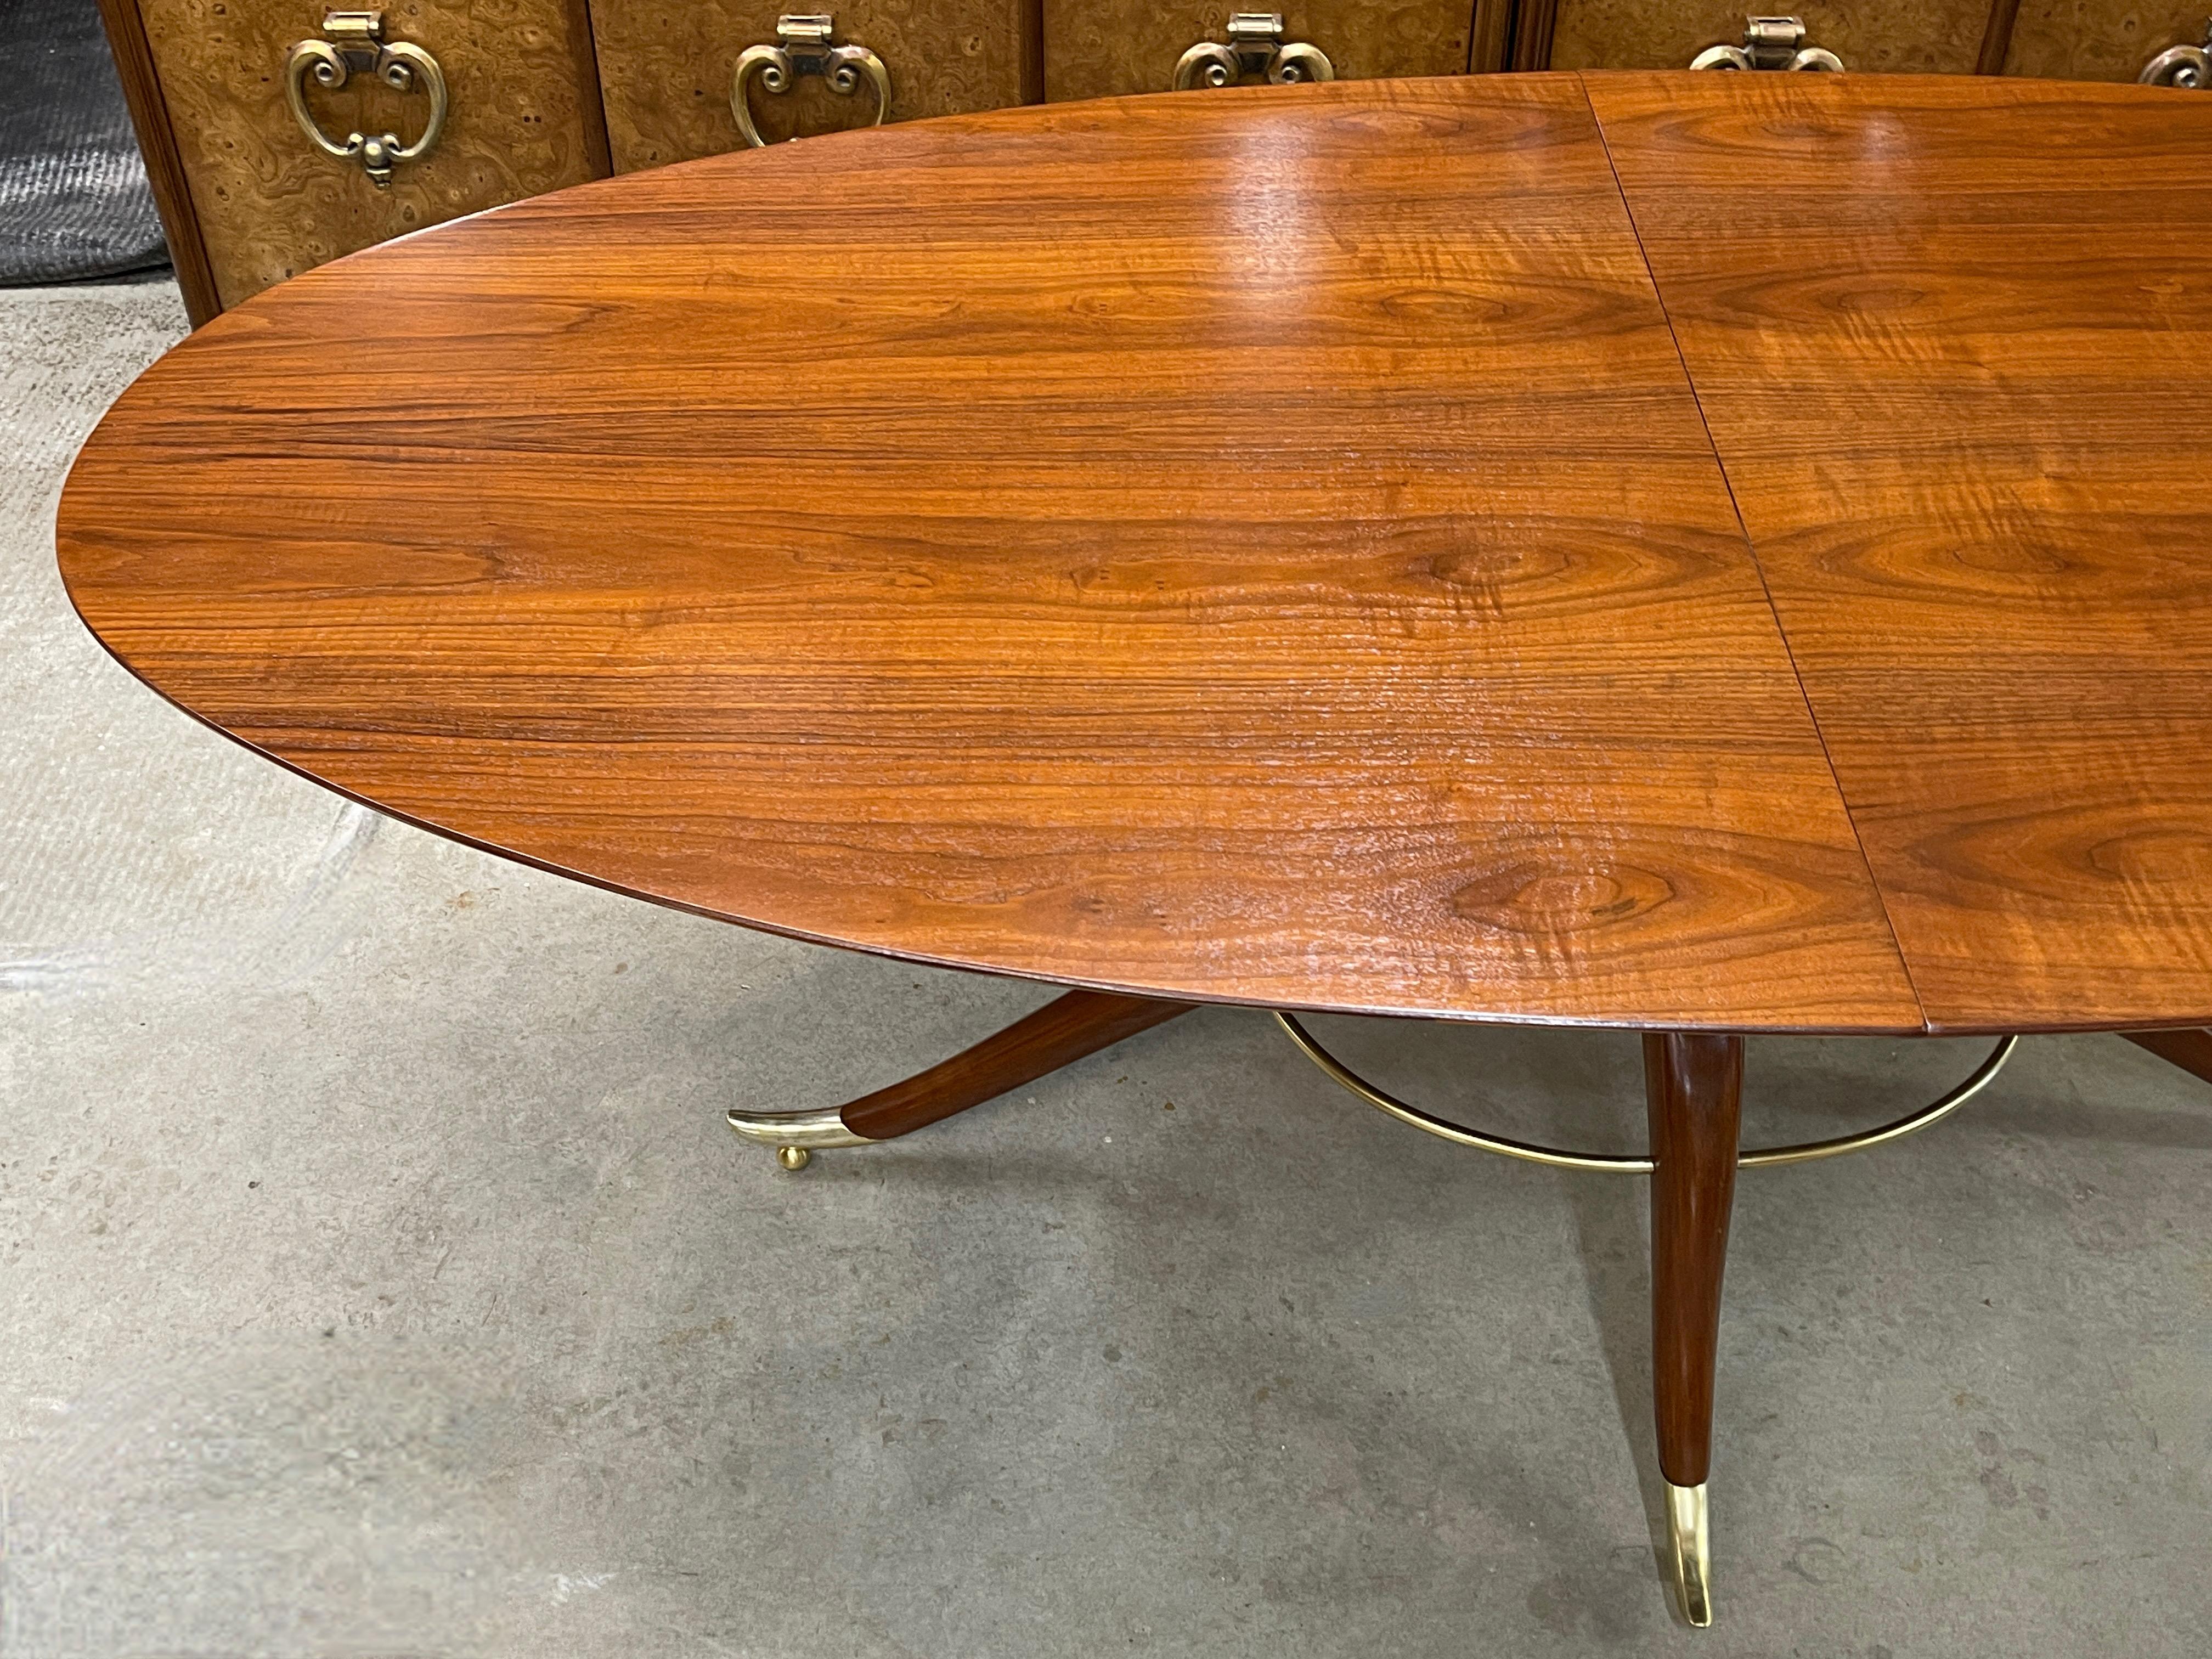 Mid-Century Modern Elliptical Oval Dining Table by Adolfo Genovese for F&G Handmade Furniture